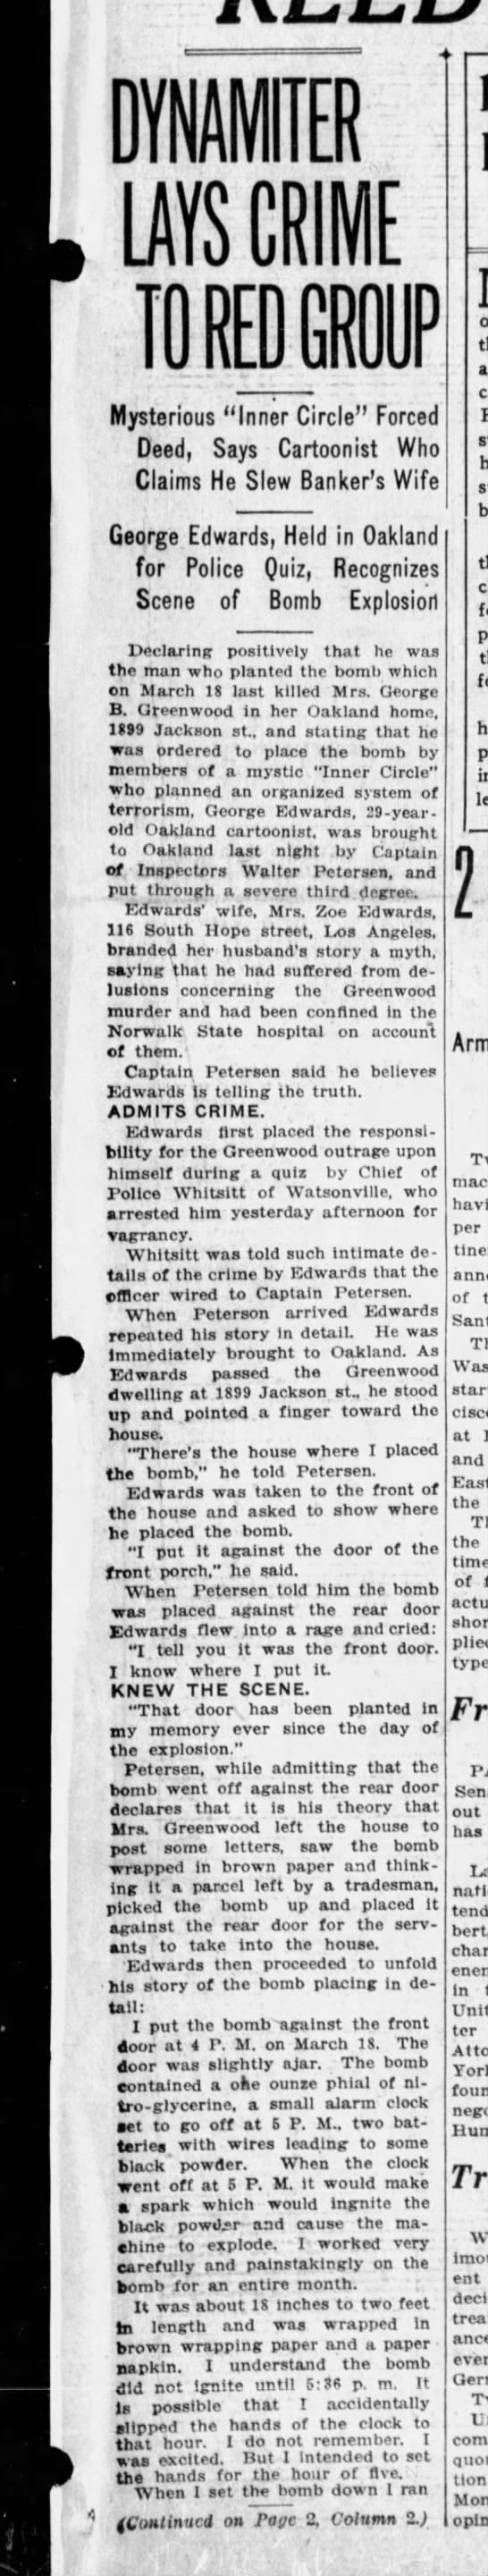 Dynamiter Lays Crime to Red Group - S.F. Examiner September 23, 1919 - 